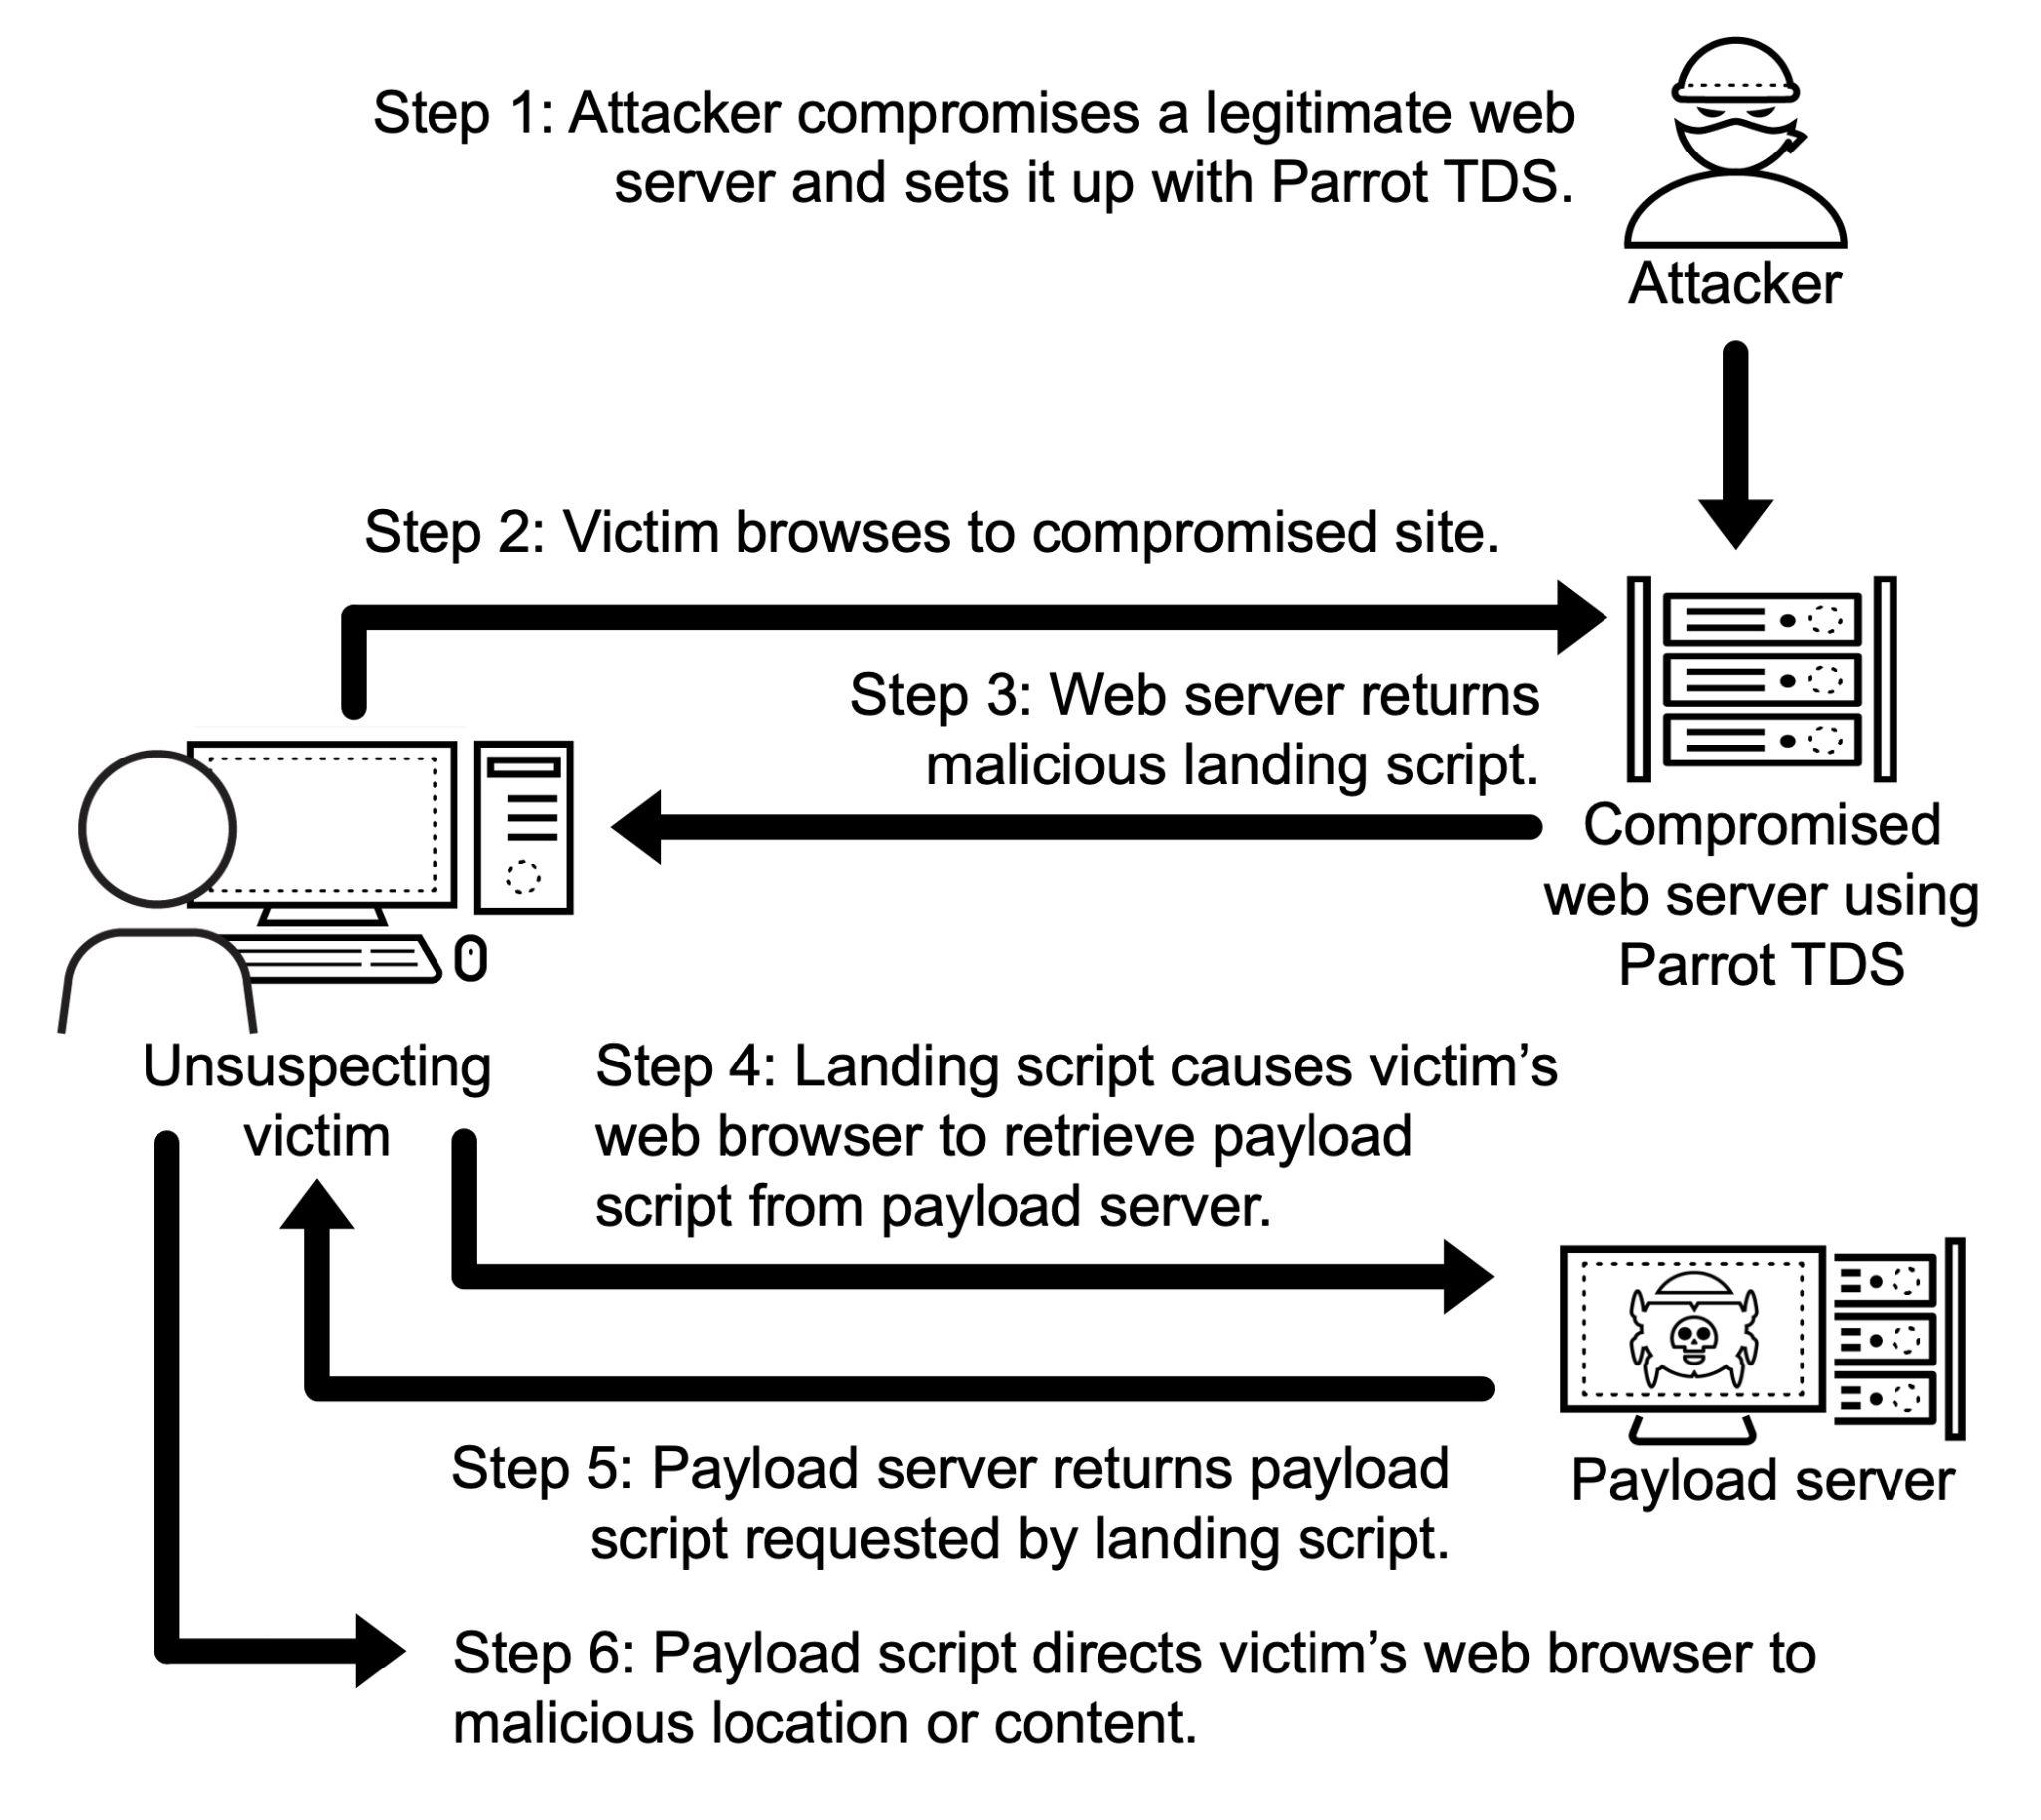 Image 1 is an attack chain diagram of Parrot TDS. Step 1: Attacker compromises a legitimate server and sets it up with Parrot TDS. Icon of attacker with arrow at server. Compromised web server song Parrot TDS. Step 2: Victim browses to compromised site. Icon of unsuspecting victim at computer. Arrow to server. Step 3: Web server returns malicious landing script. Step 4: Landing script causes victim’s web browser to retrieve payload script from payload server. Arrow to payload server. Arrow to victim. Step 5: Payload server returns payload script requested by landing script. Step 6: Payload script directs victim’s web browser to malicious location or content. 